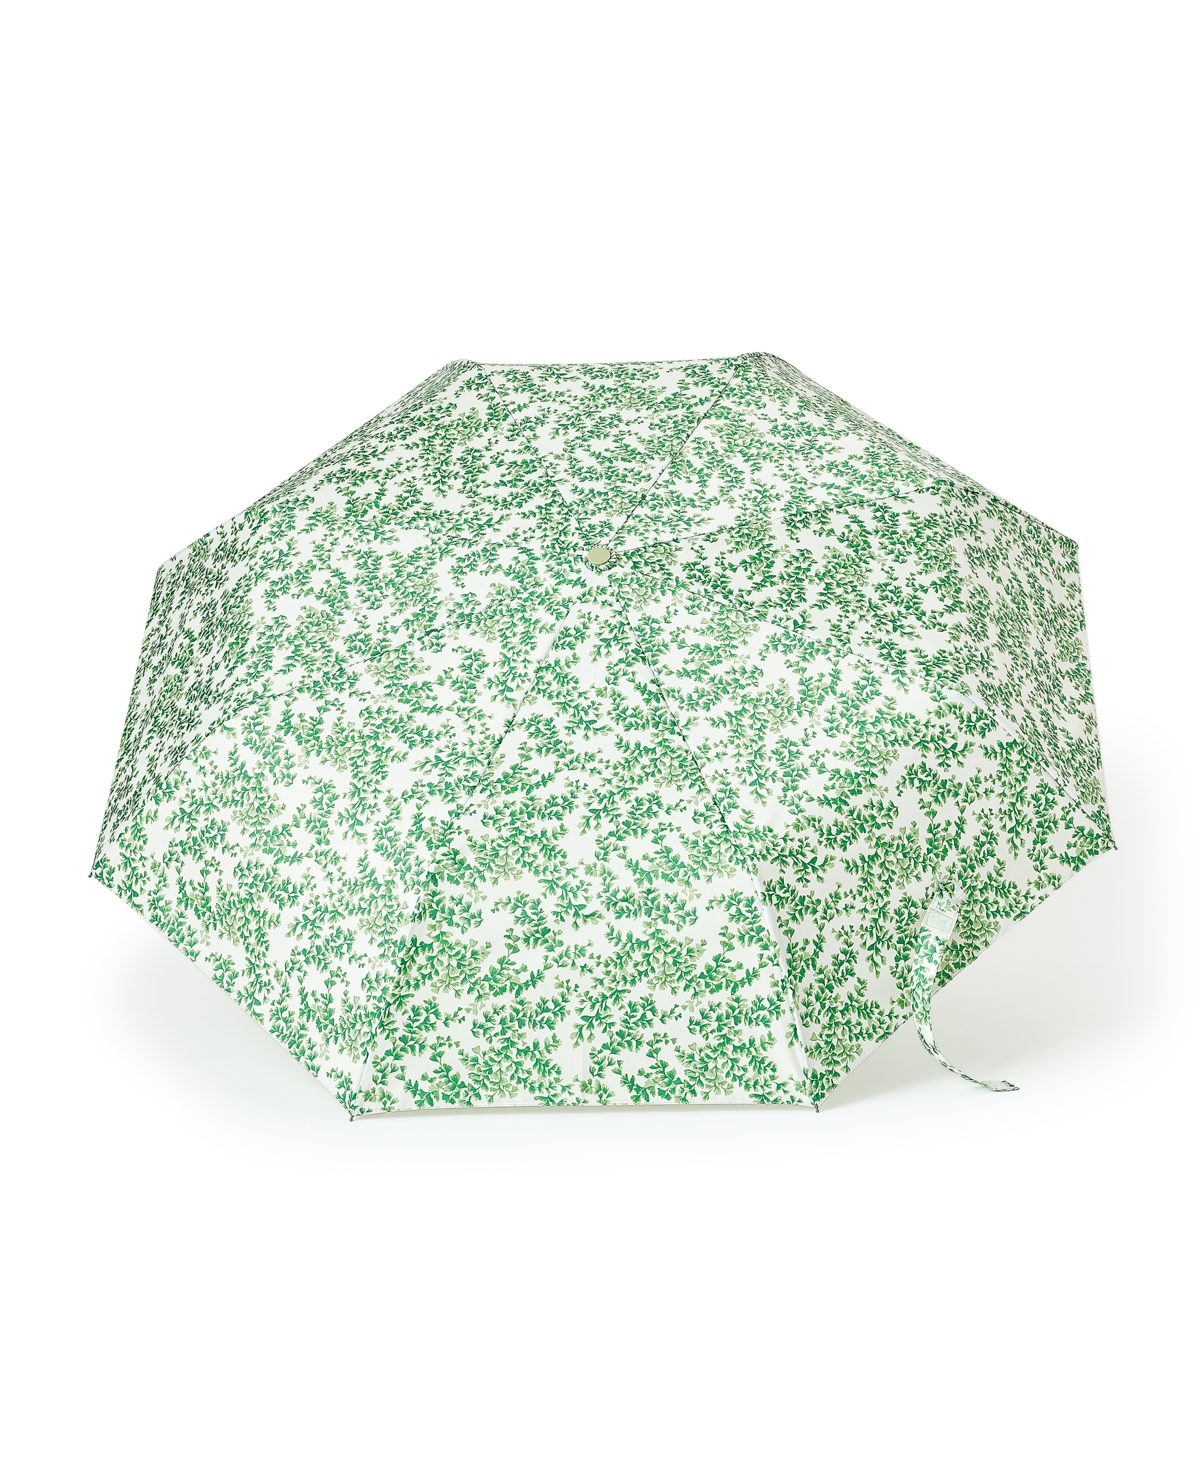 Macy's Flower Show Auto Folding Umbrella, Created For  In Green Leaf